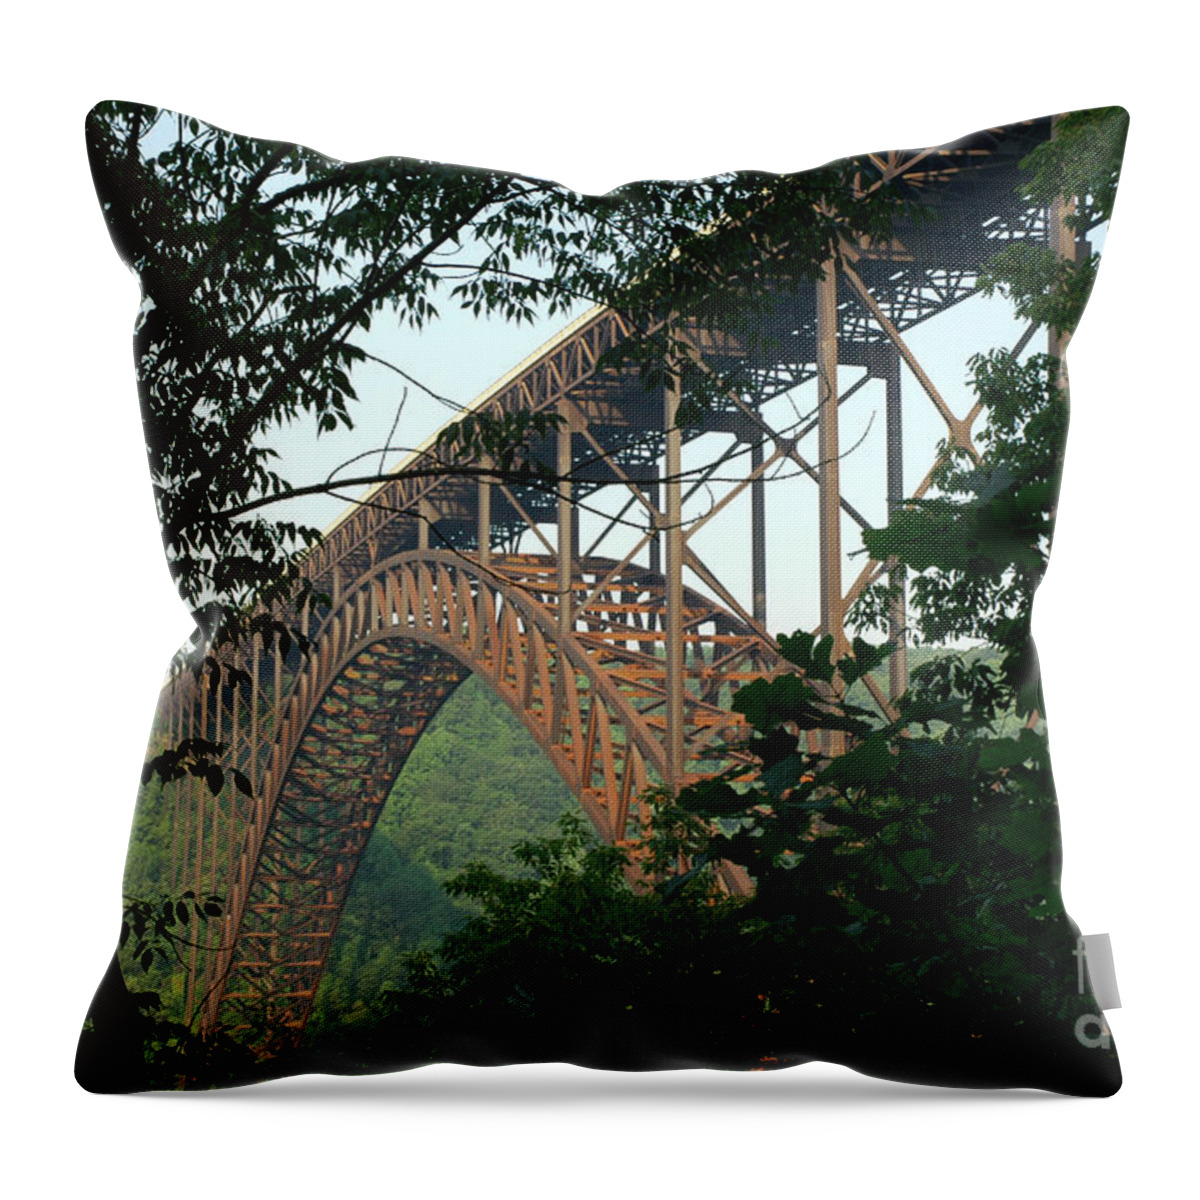 West Virginia Throw Pillow featuring the photograph New River Gorge Bridge by Thomas R Fletcher